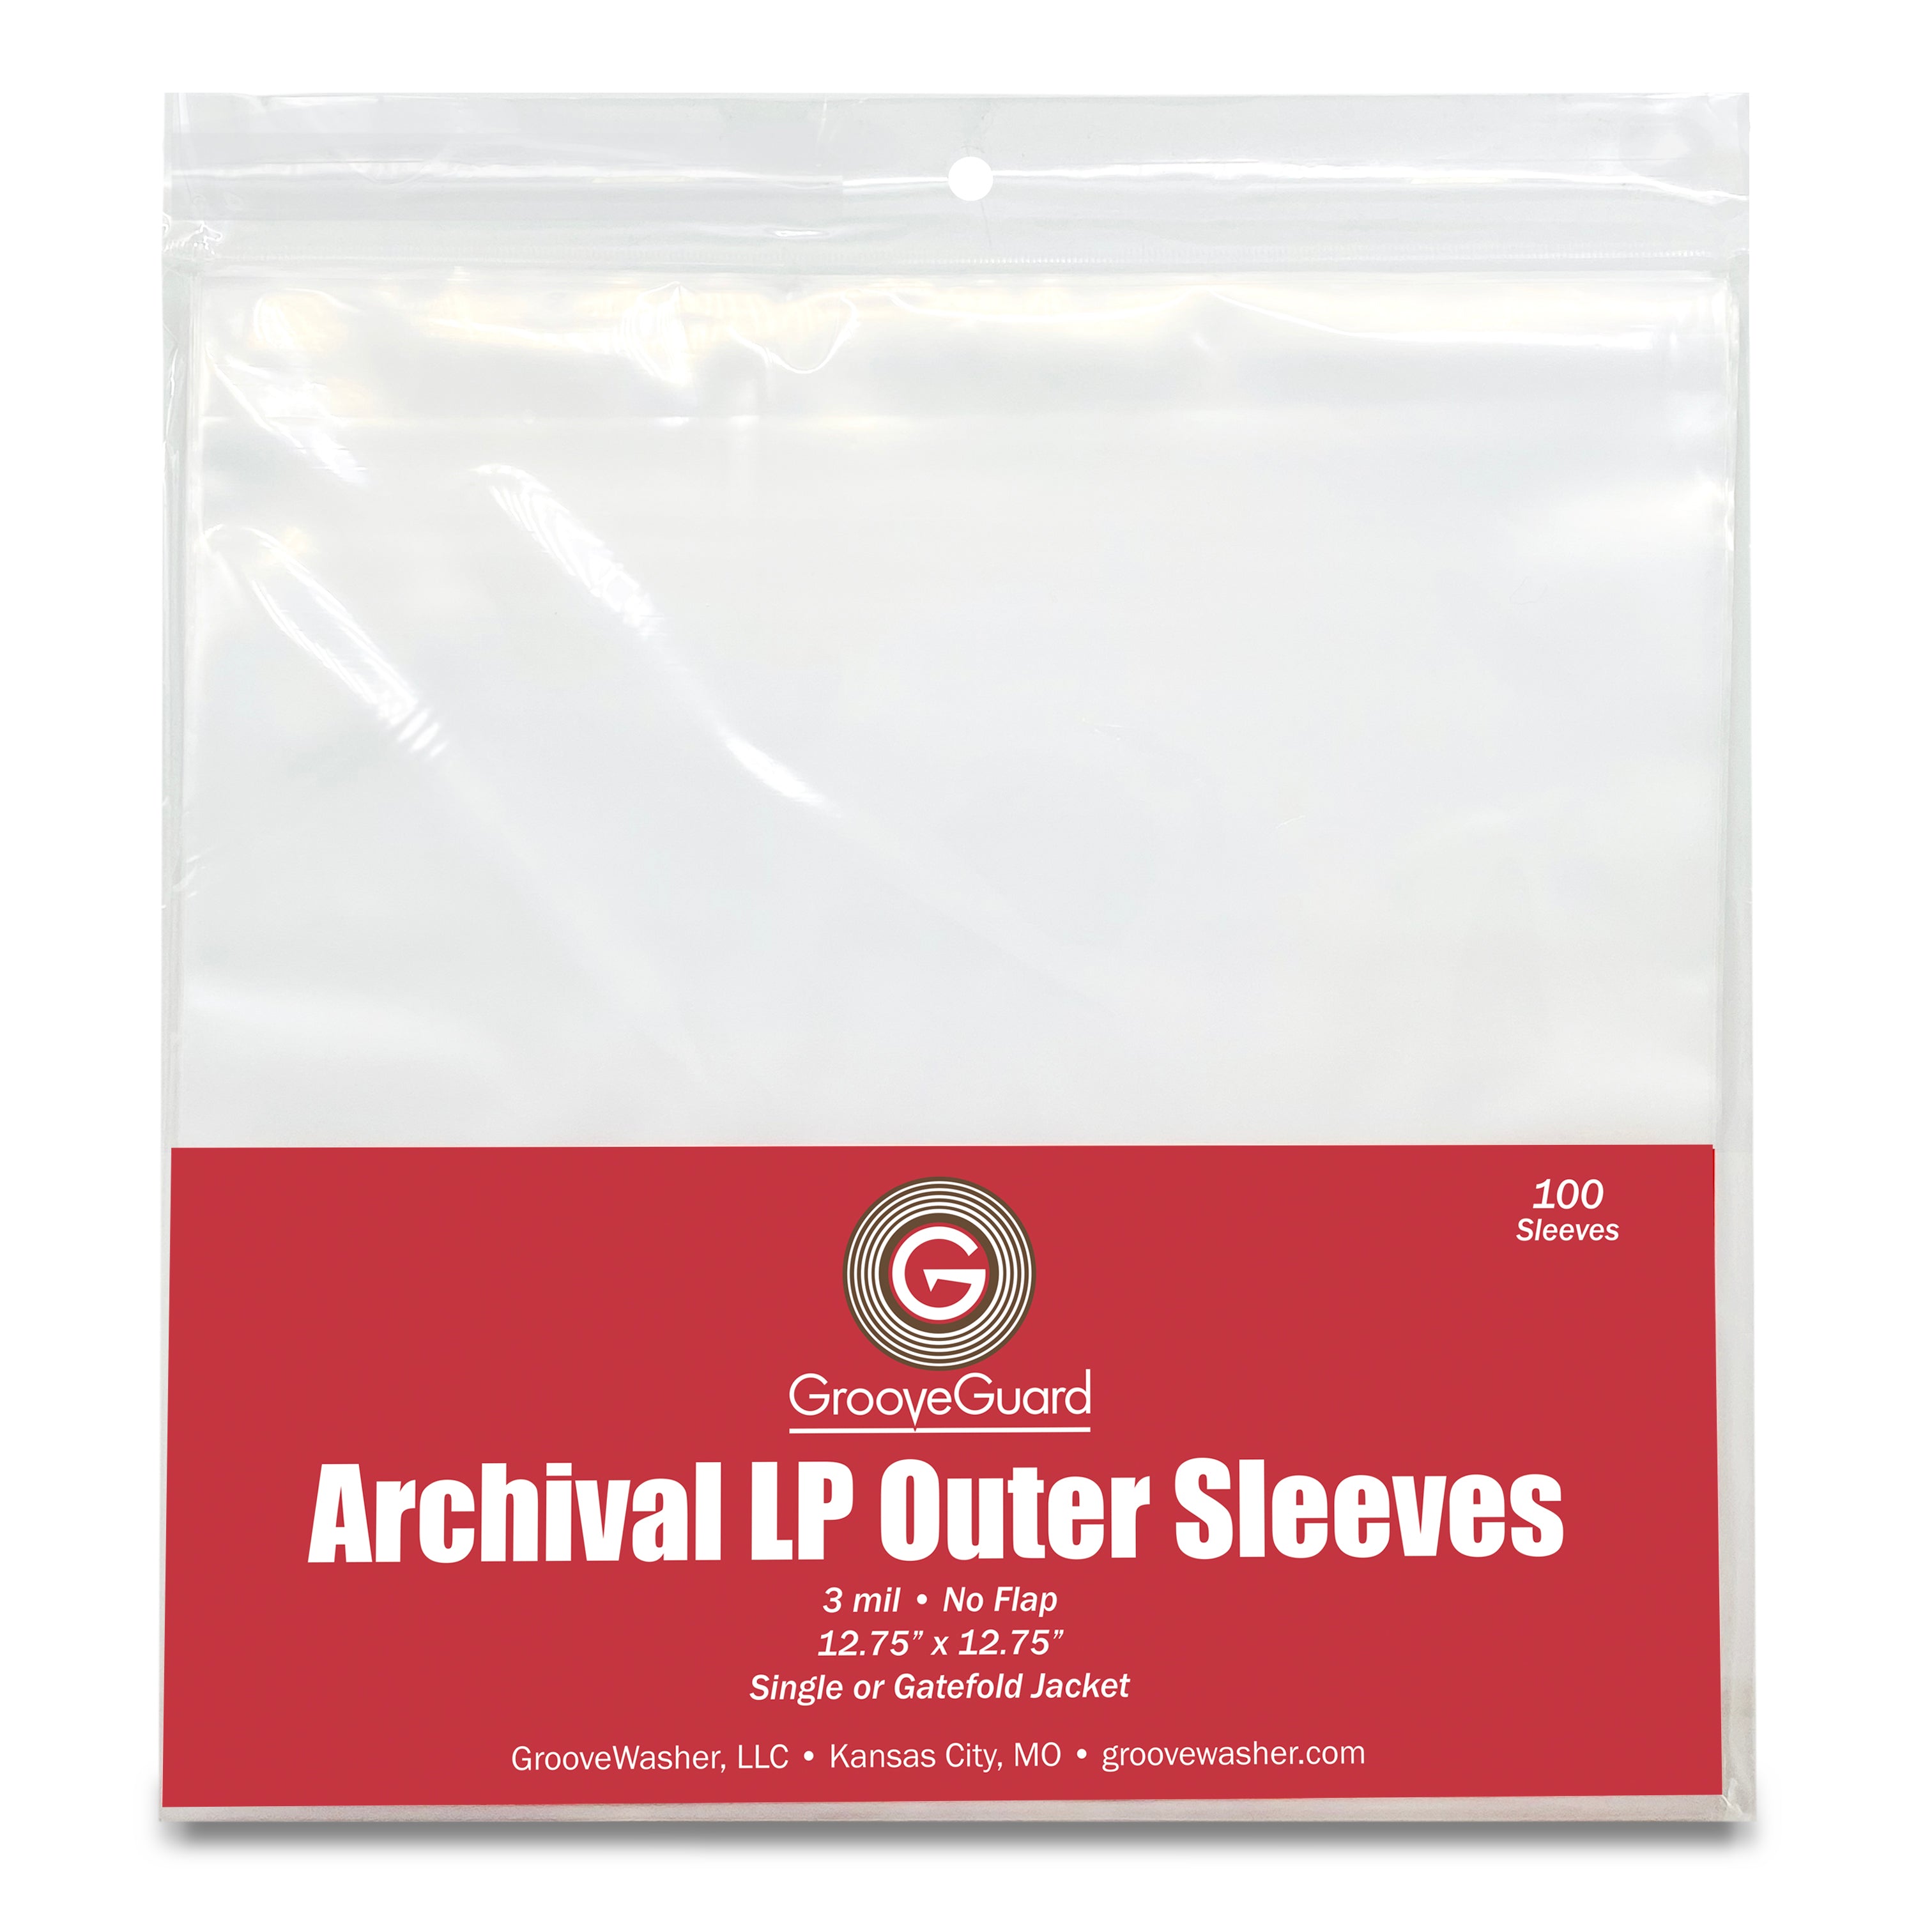 GrooveGuard: Archival LP Outer Sleeves (100)